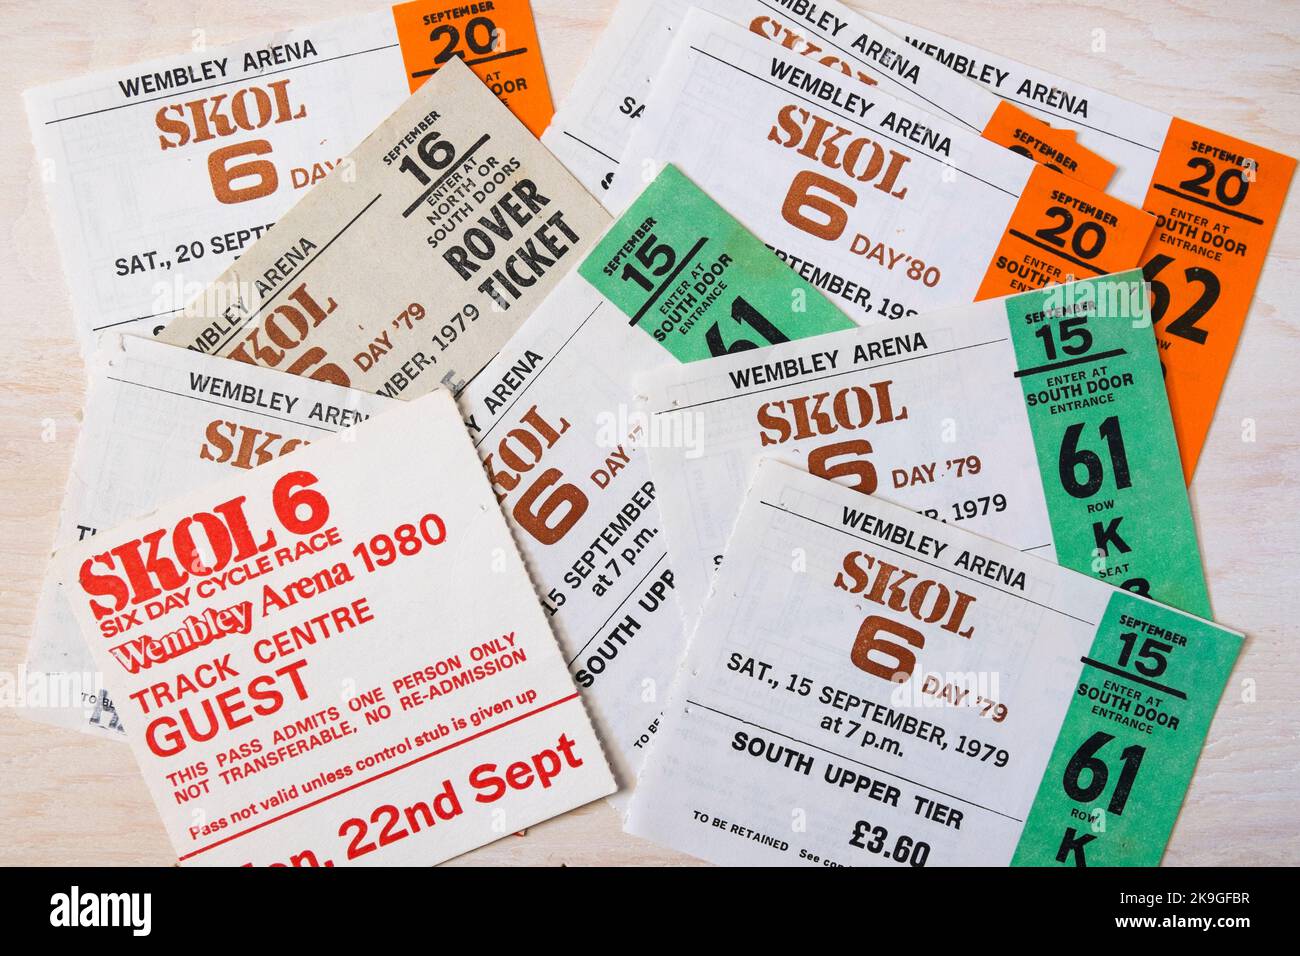 Ticket stubs for the Skol 6 Day Cycle Race, an indoor track cycling event with different types of races throughout the week in the 1970s & 1980s at We Stock Photo